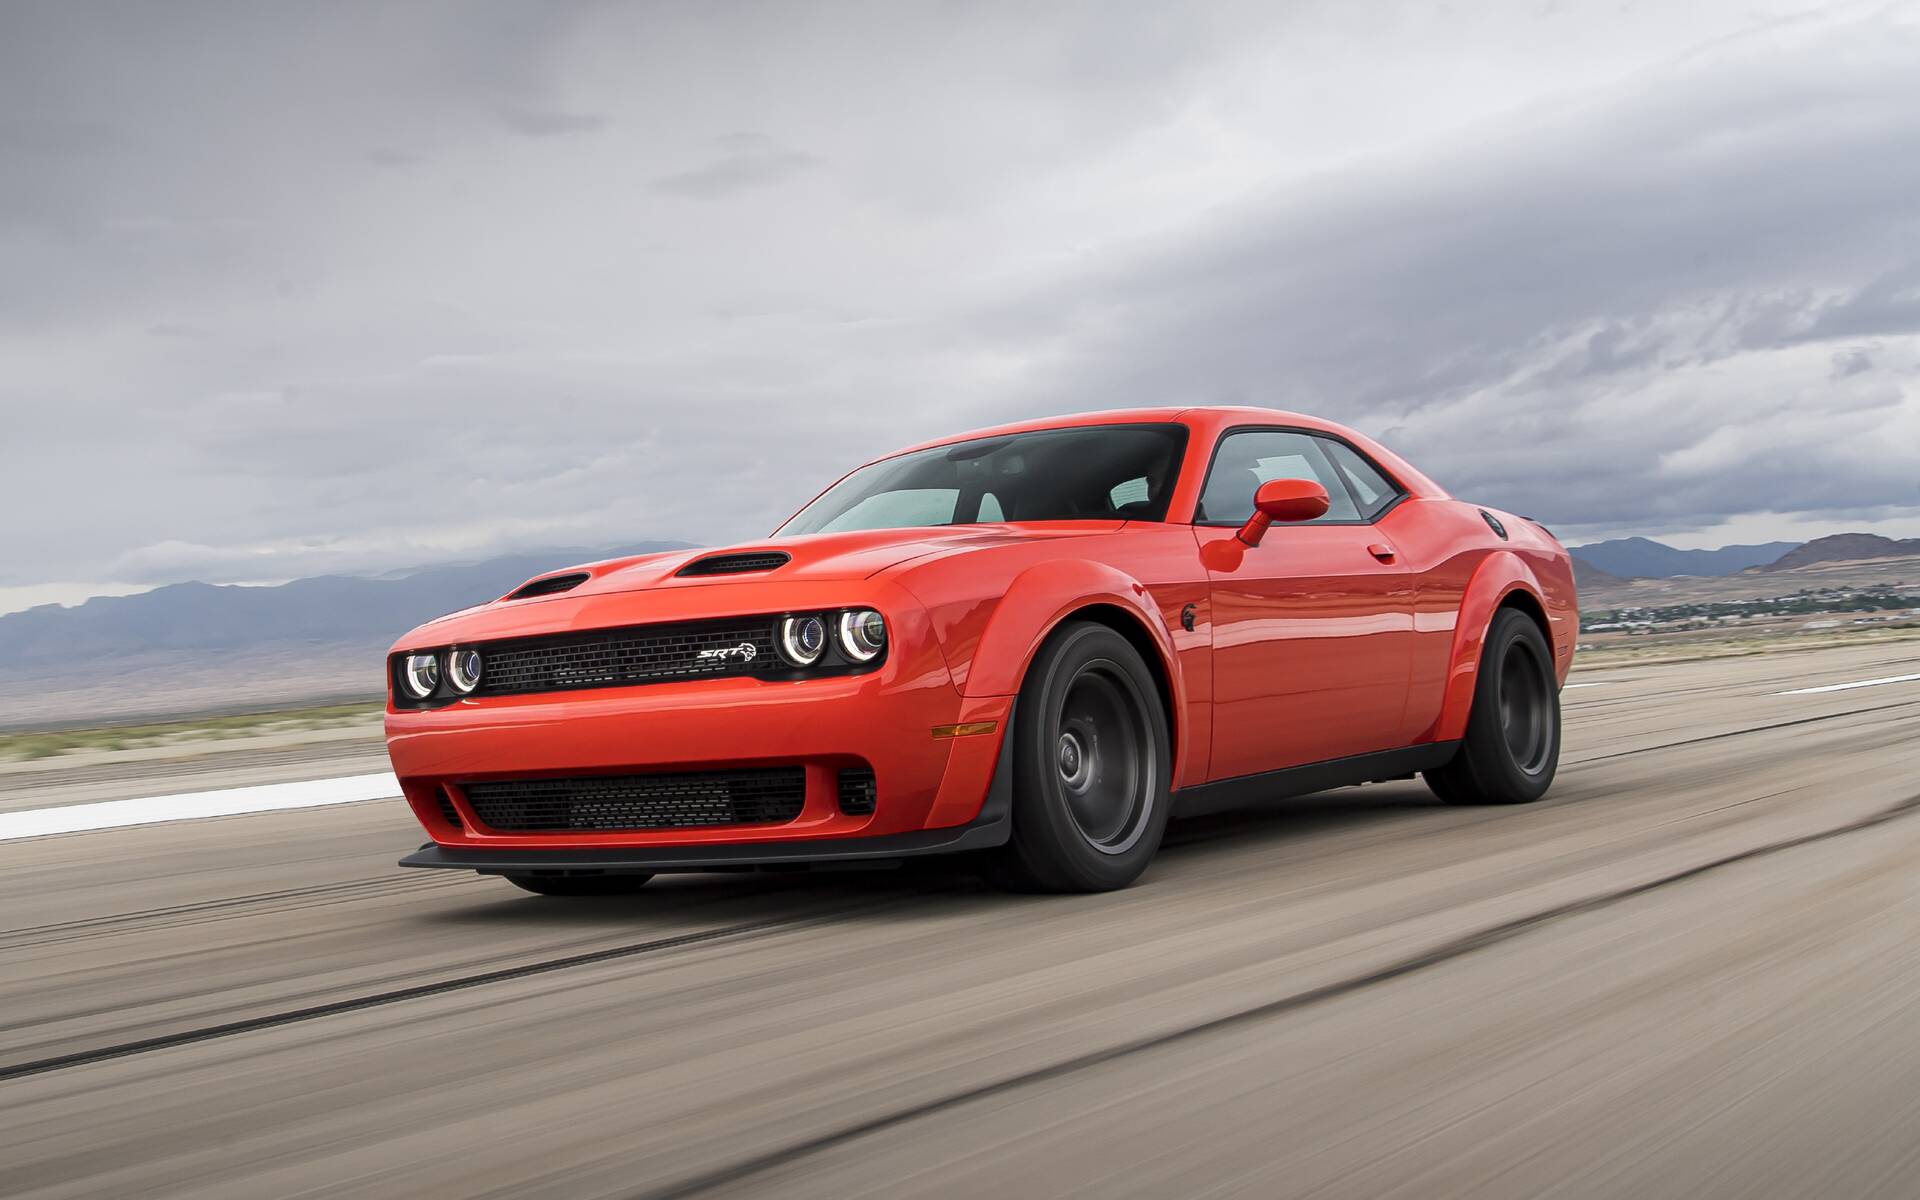 21 Dodge Challenger News Reviews Picture Galleries And Videos The Car Guide